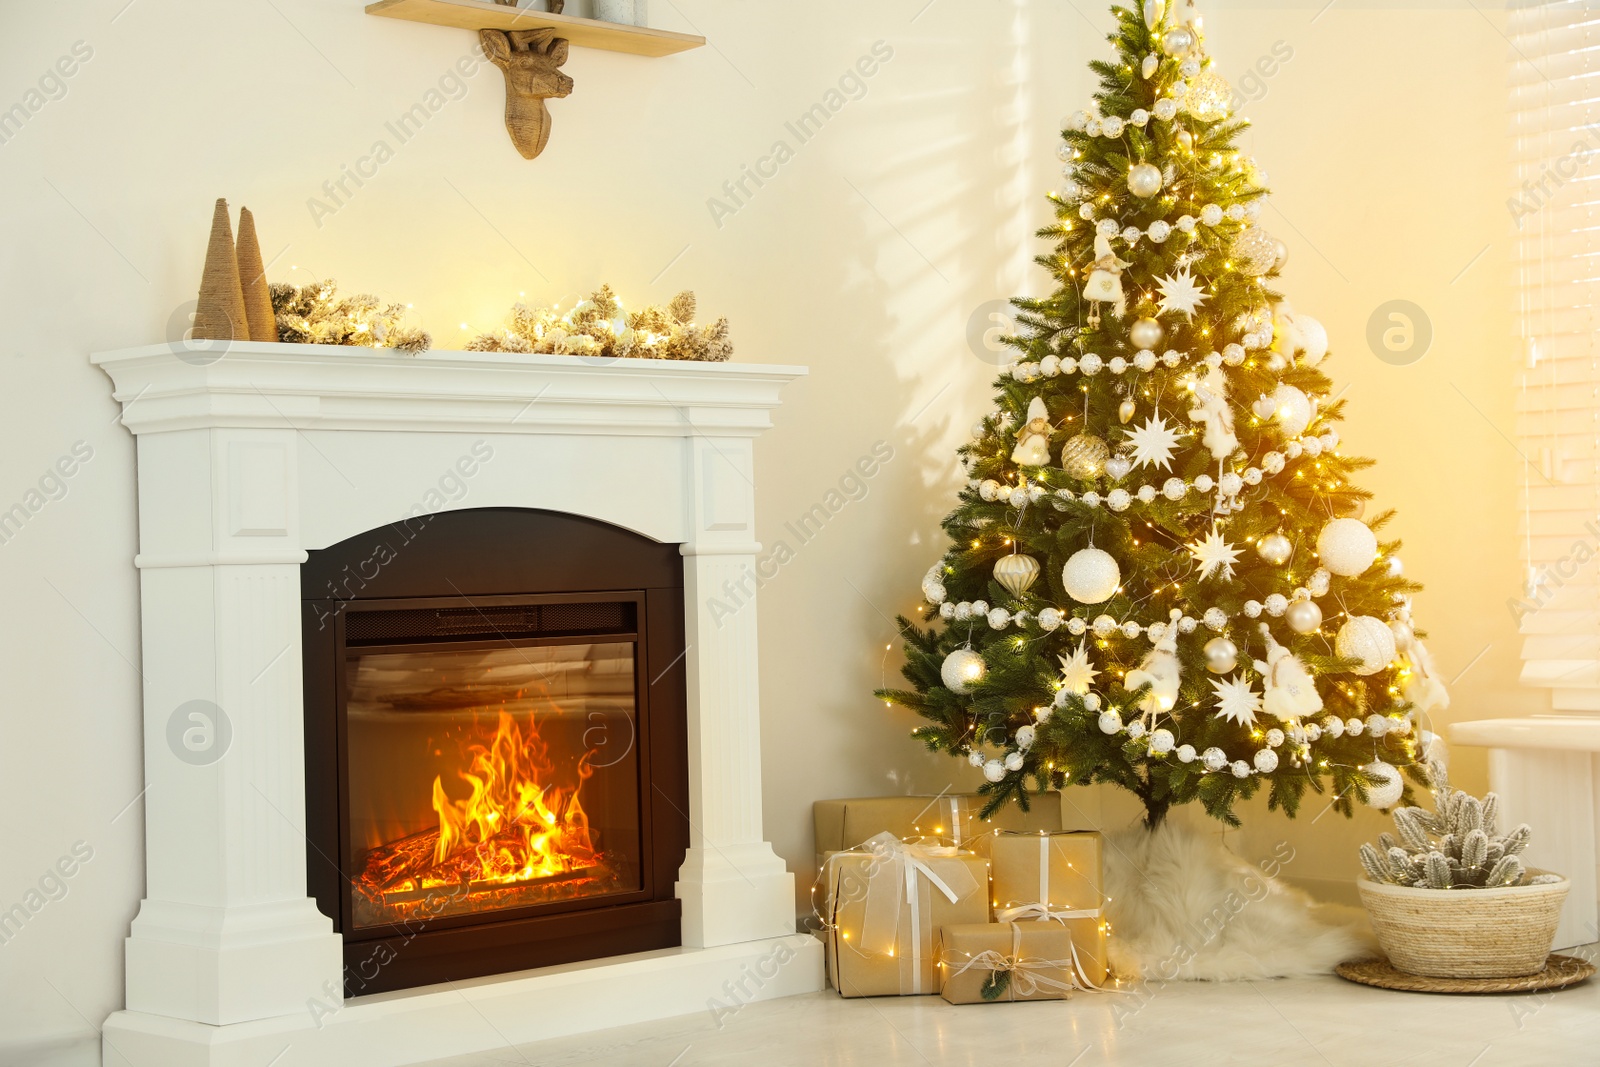 Photo of Decorated Christmas tree with faux fur skirt and gift boxes near fireplace indoors